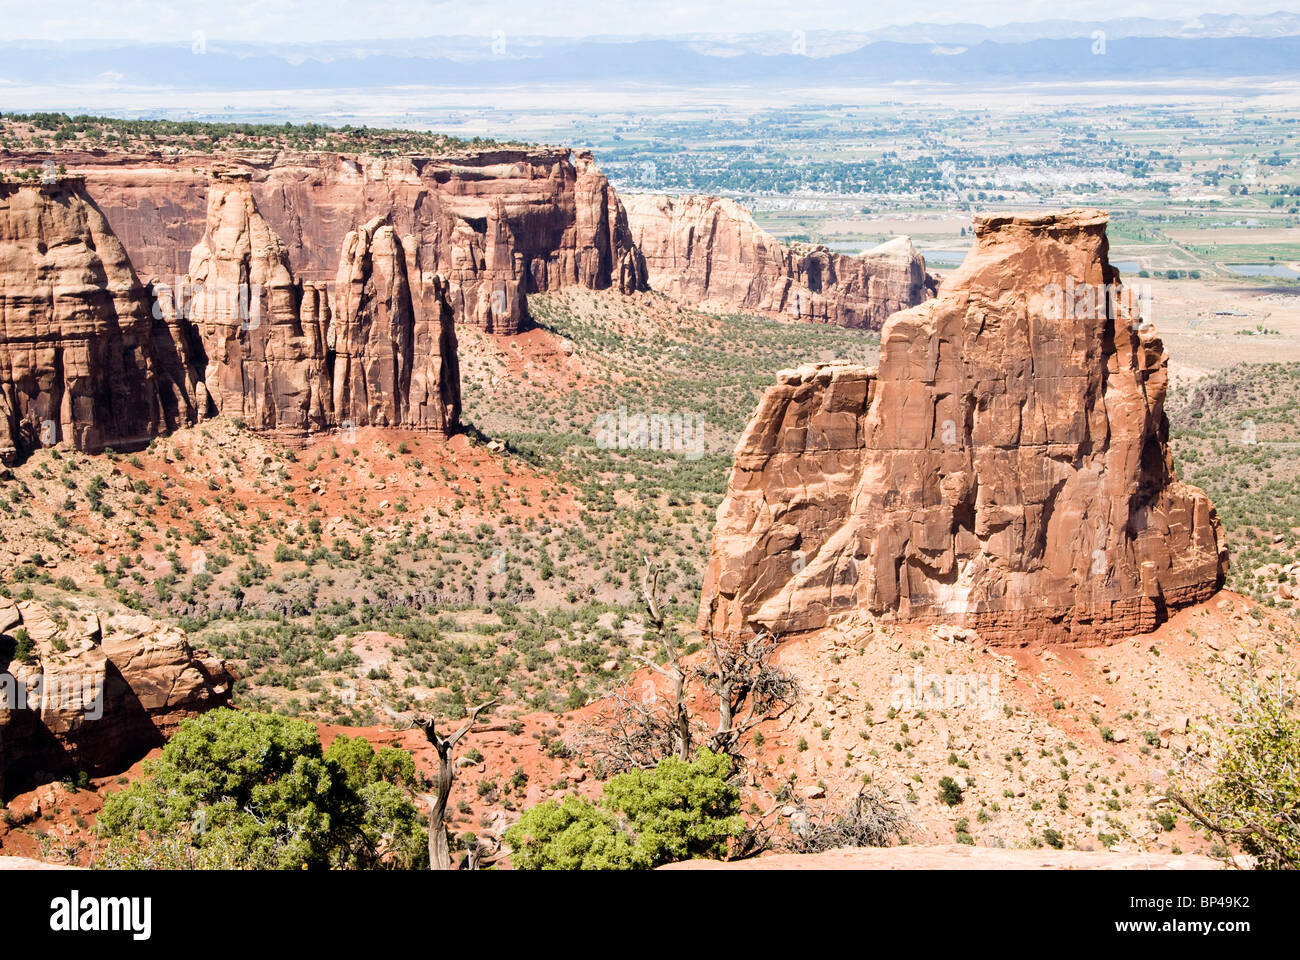 Independence Monument located in the Colorado National Monument raises above the Colorado River Valley. Stock Photo